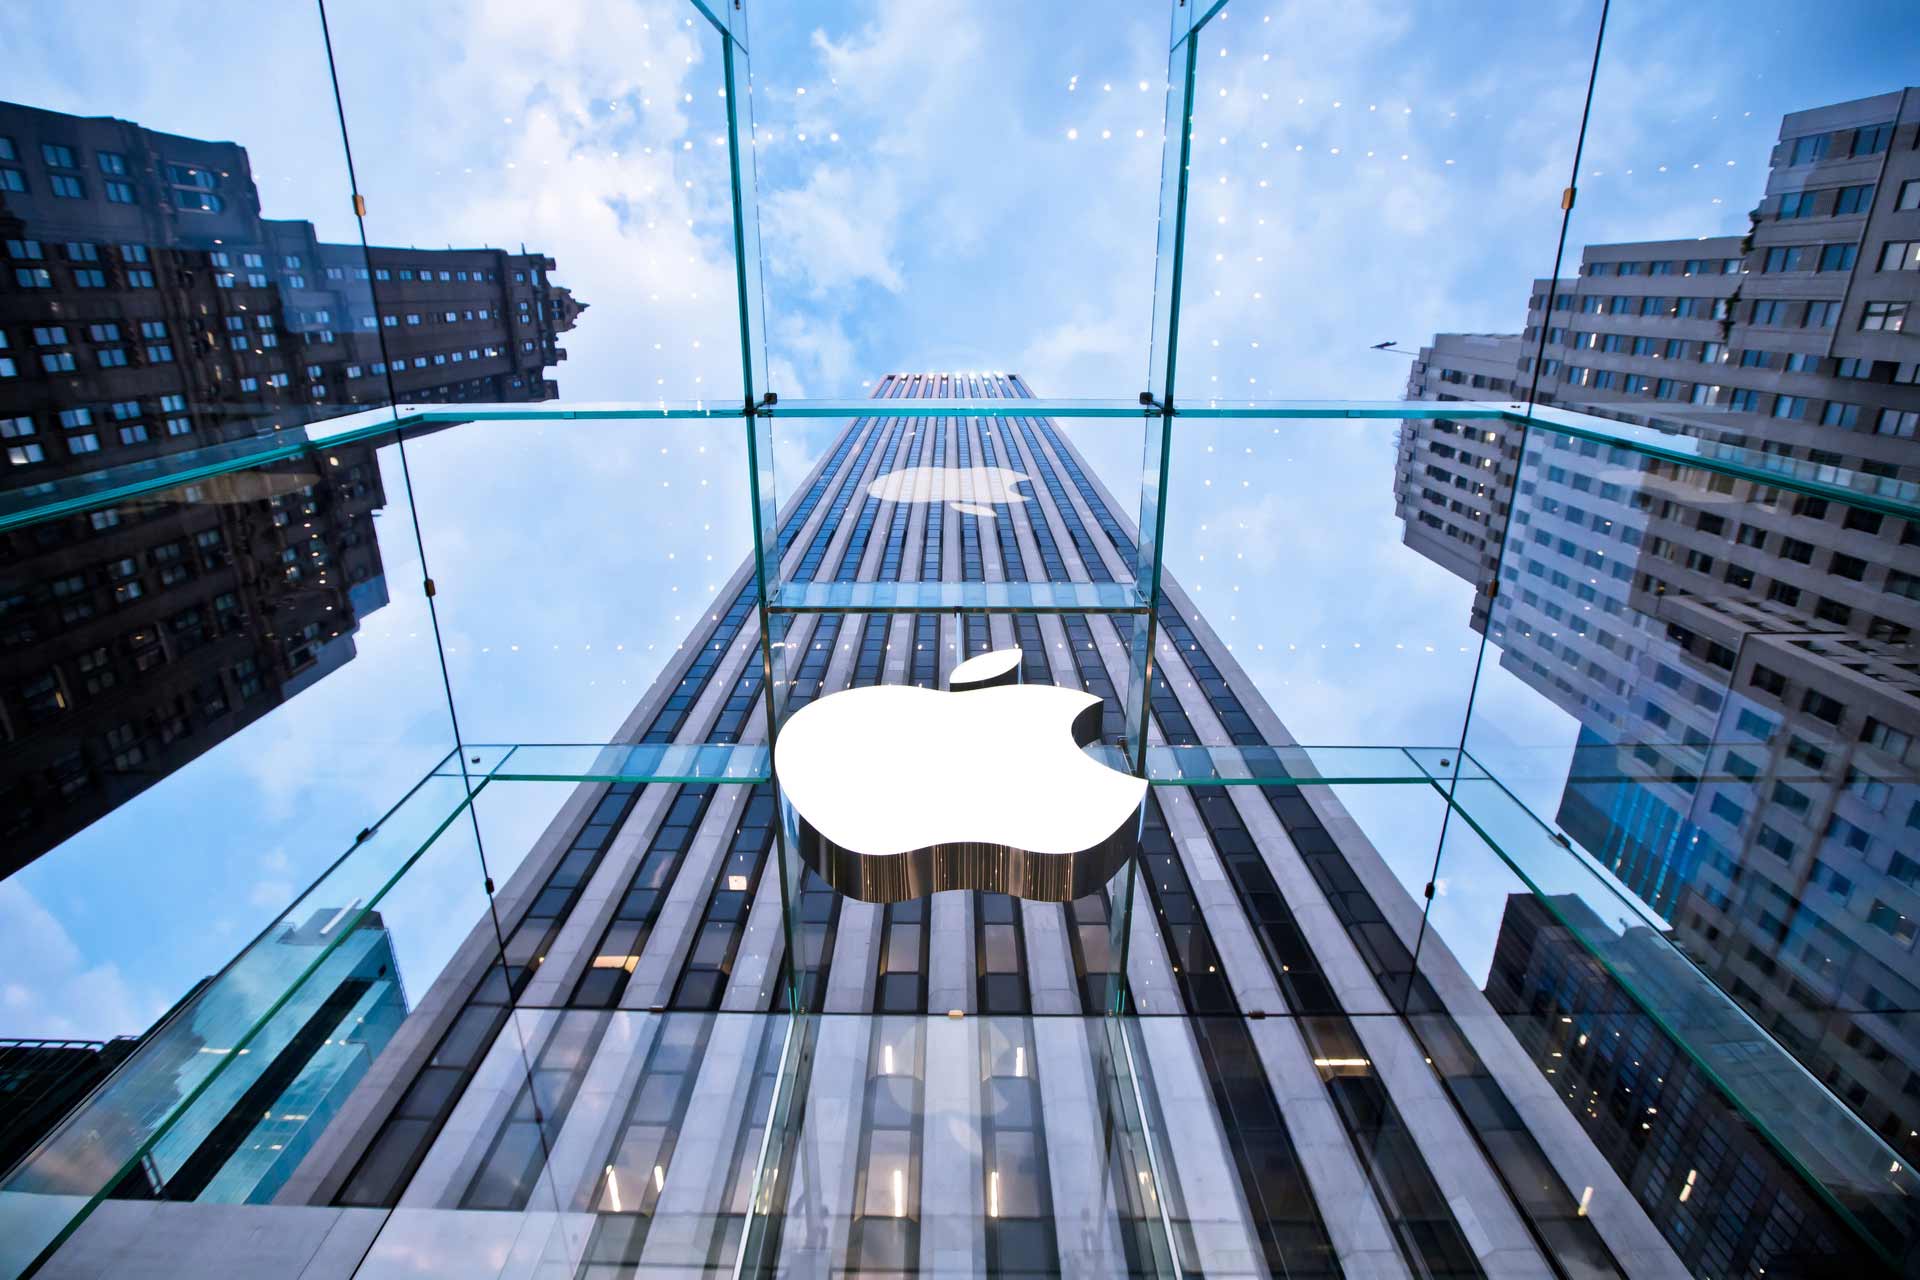 Equity market concentration is near record as Apple hits $3trn in value